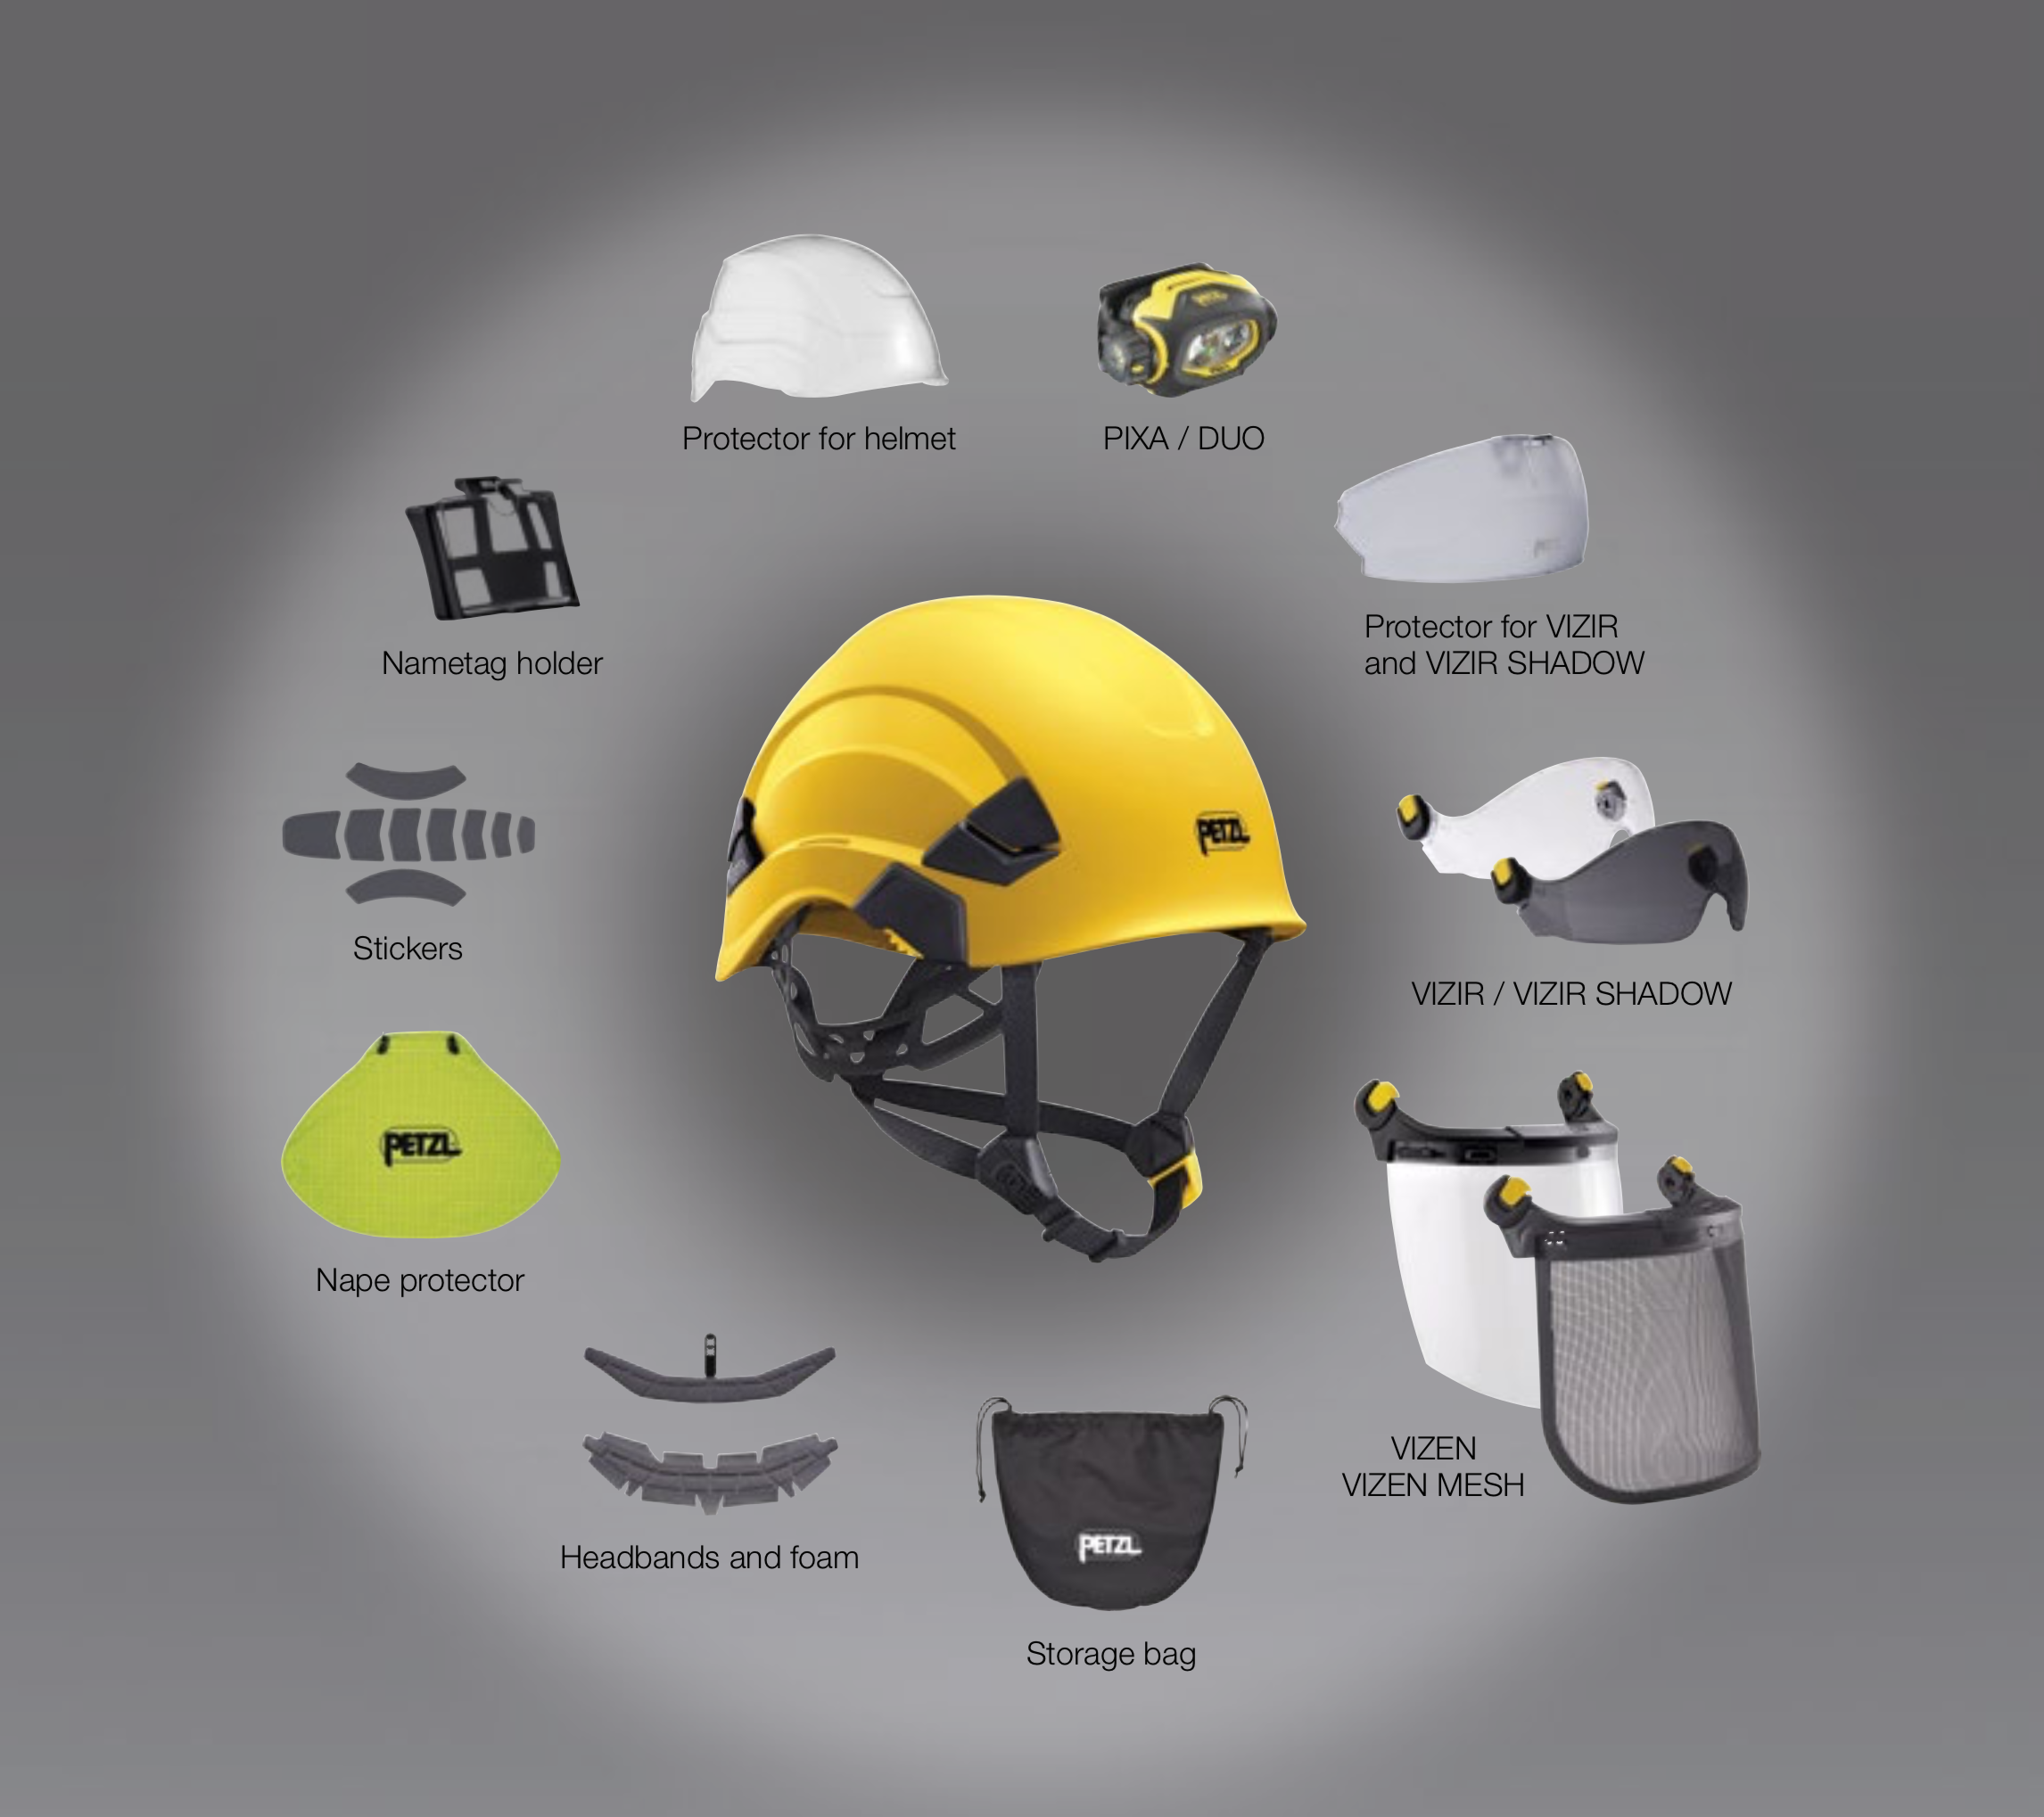 Rock Climbing Helmet with Vent Eye Shield Protective Visor for Work at  Height